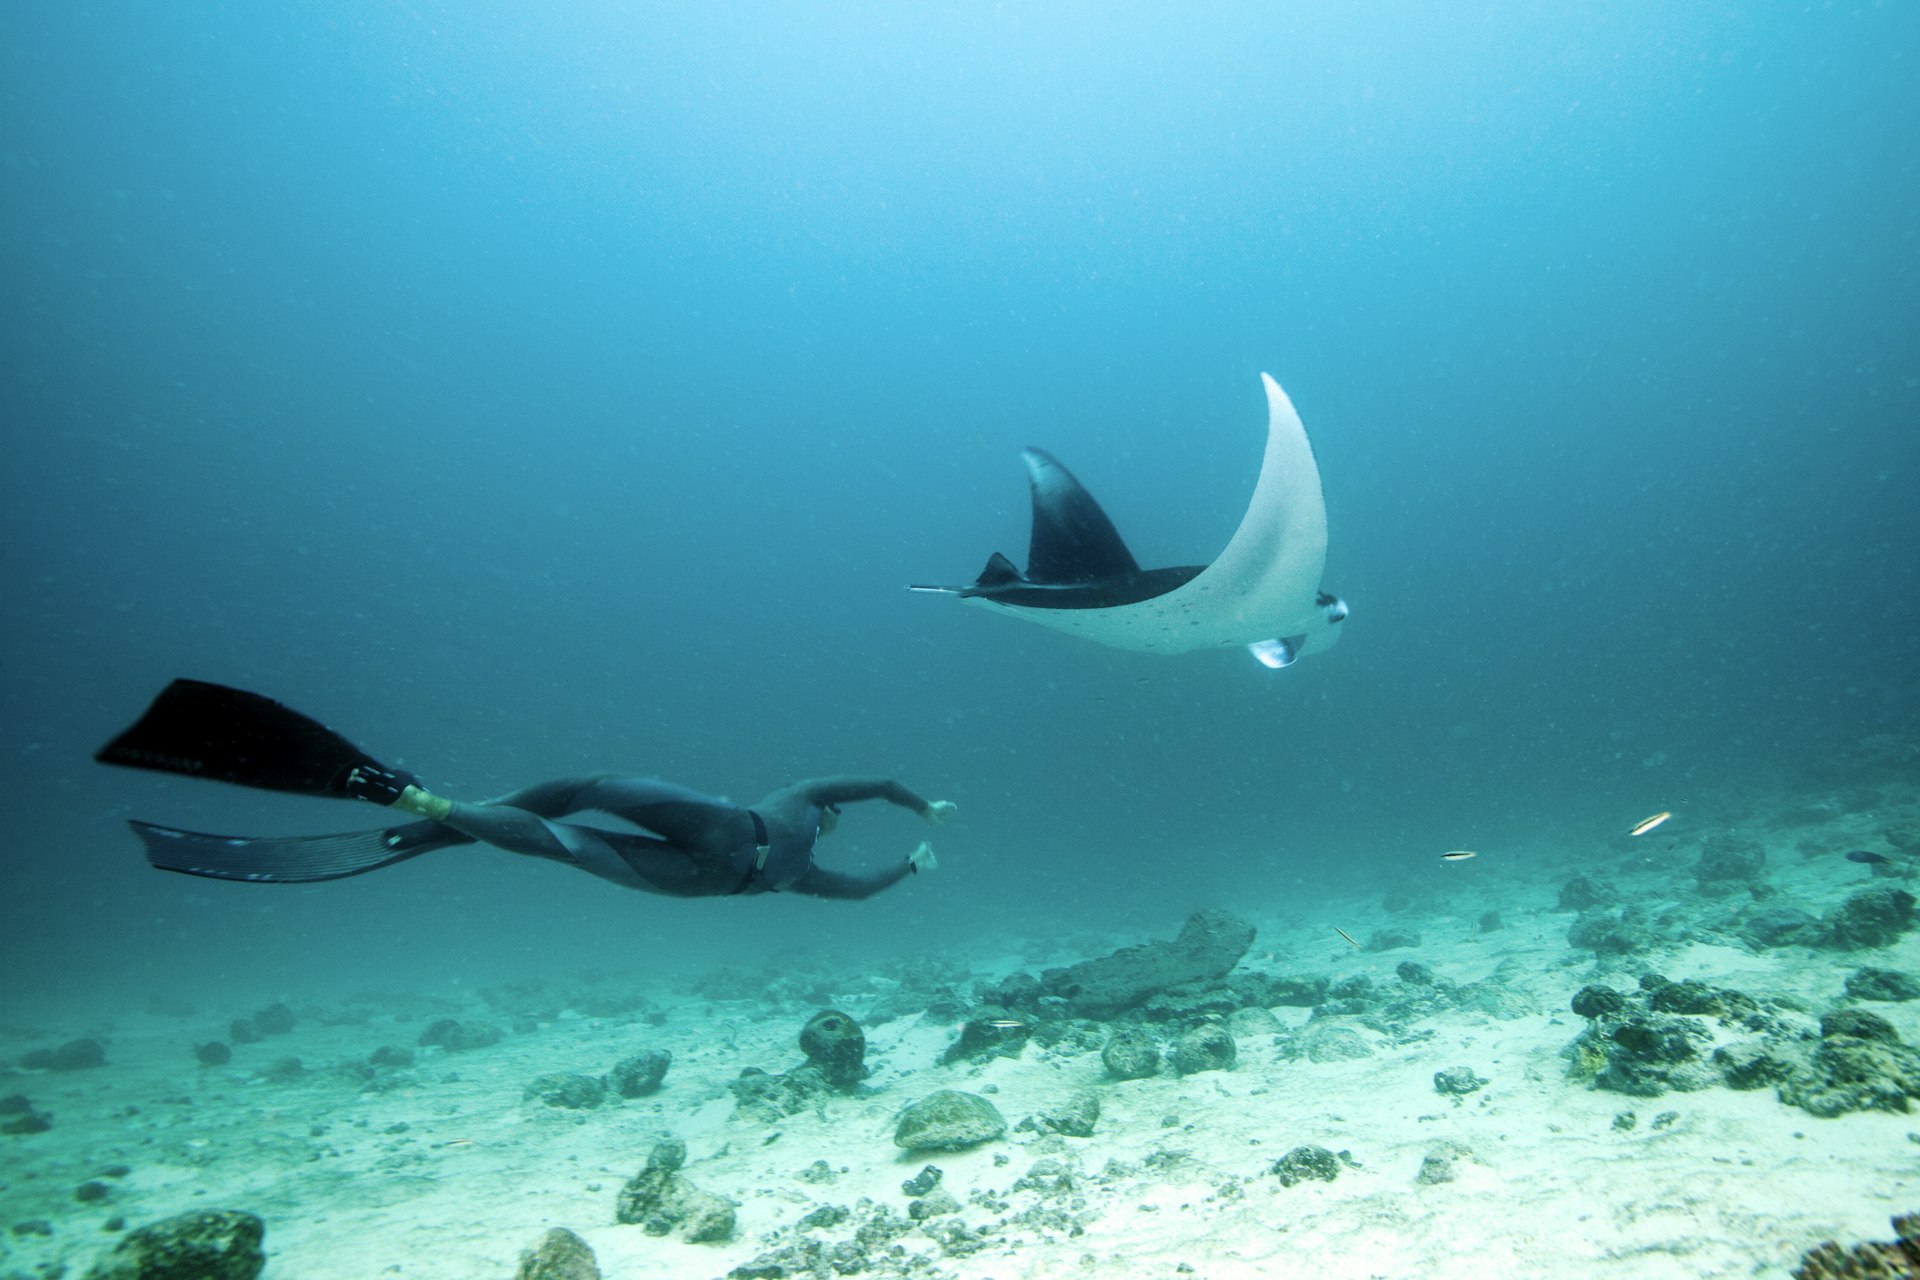 A person diving alongside a manta ray in the Maldives